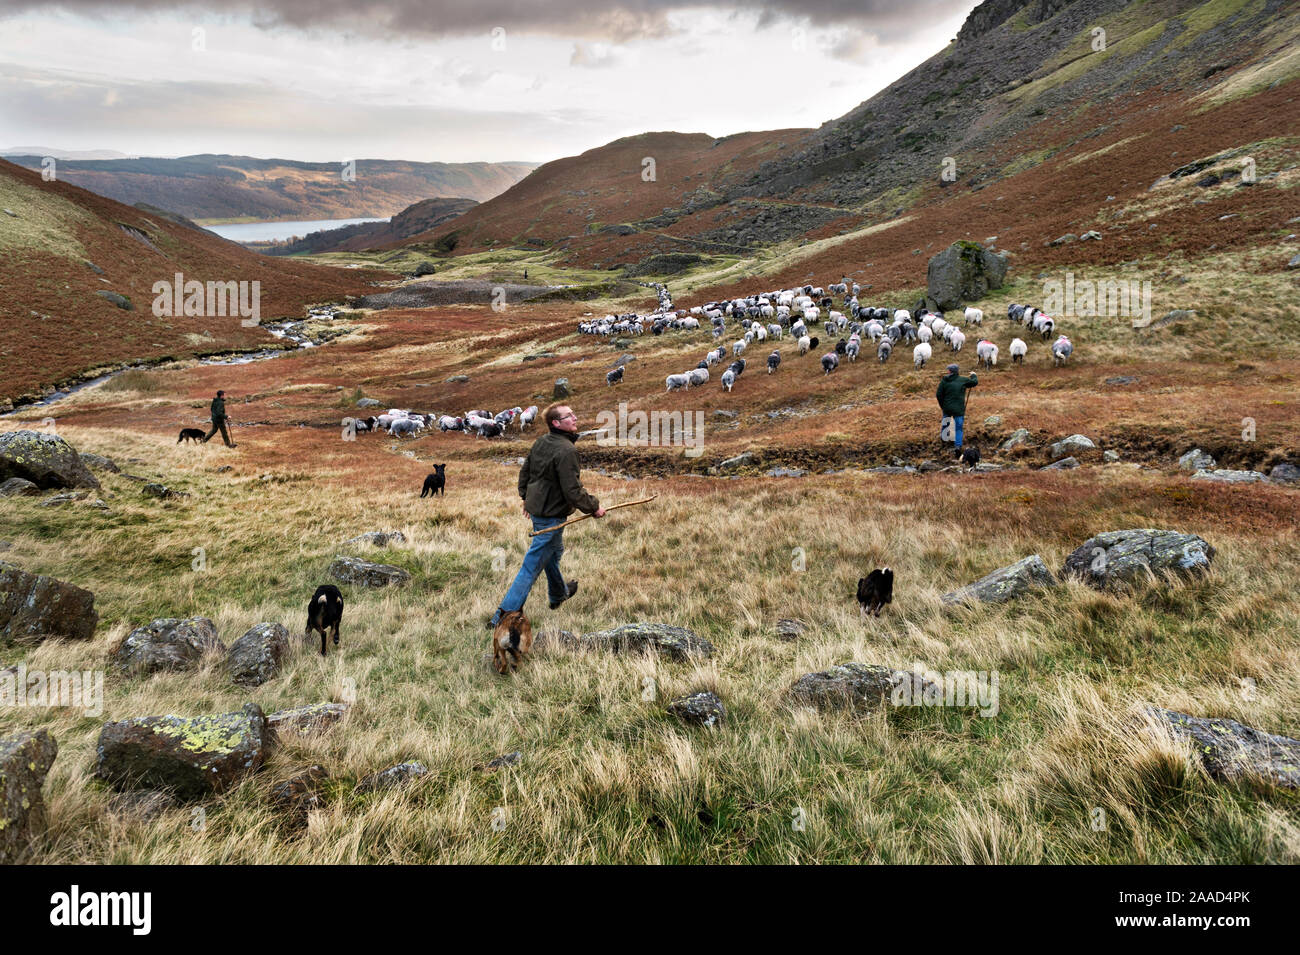 Fell gather of Herdwick and Swaledale sheep, Coniston, Cumbria, November 2019. A team of shepherds herd the flocks down towards Coniston village. Stock Photo